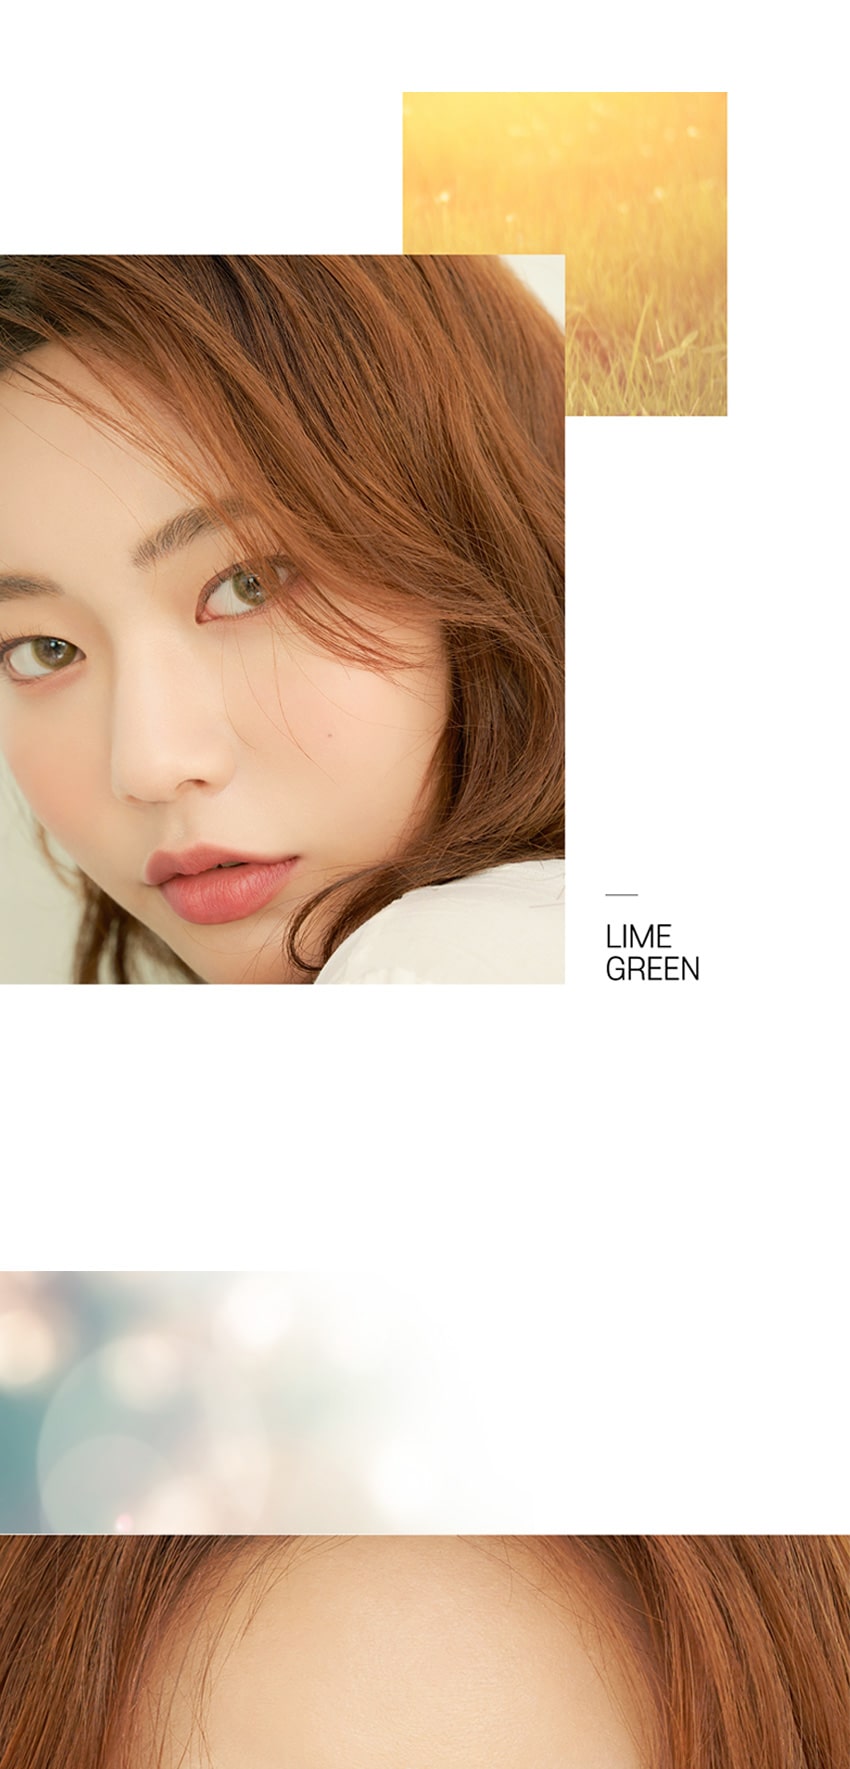 idol lens, korea popular colored contacts, desire lime green, queencontacts